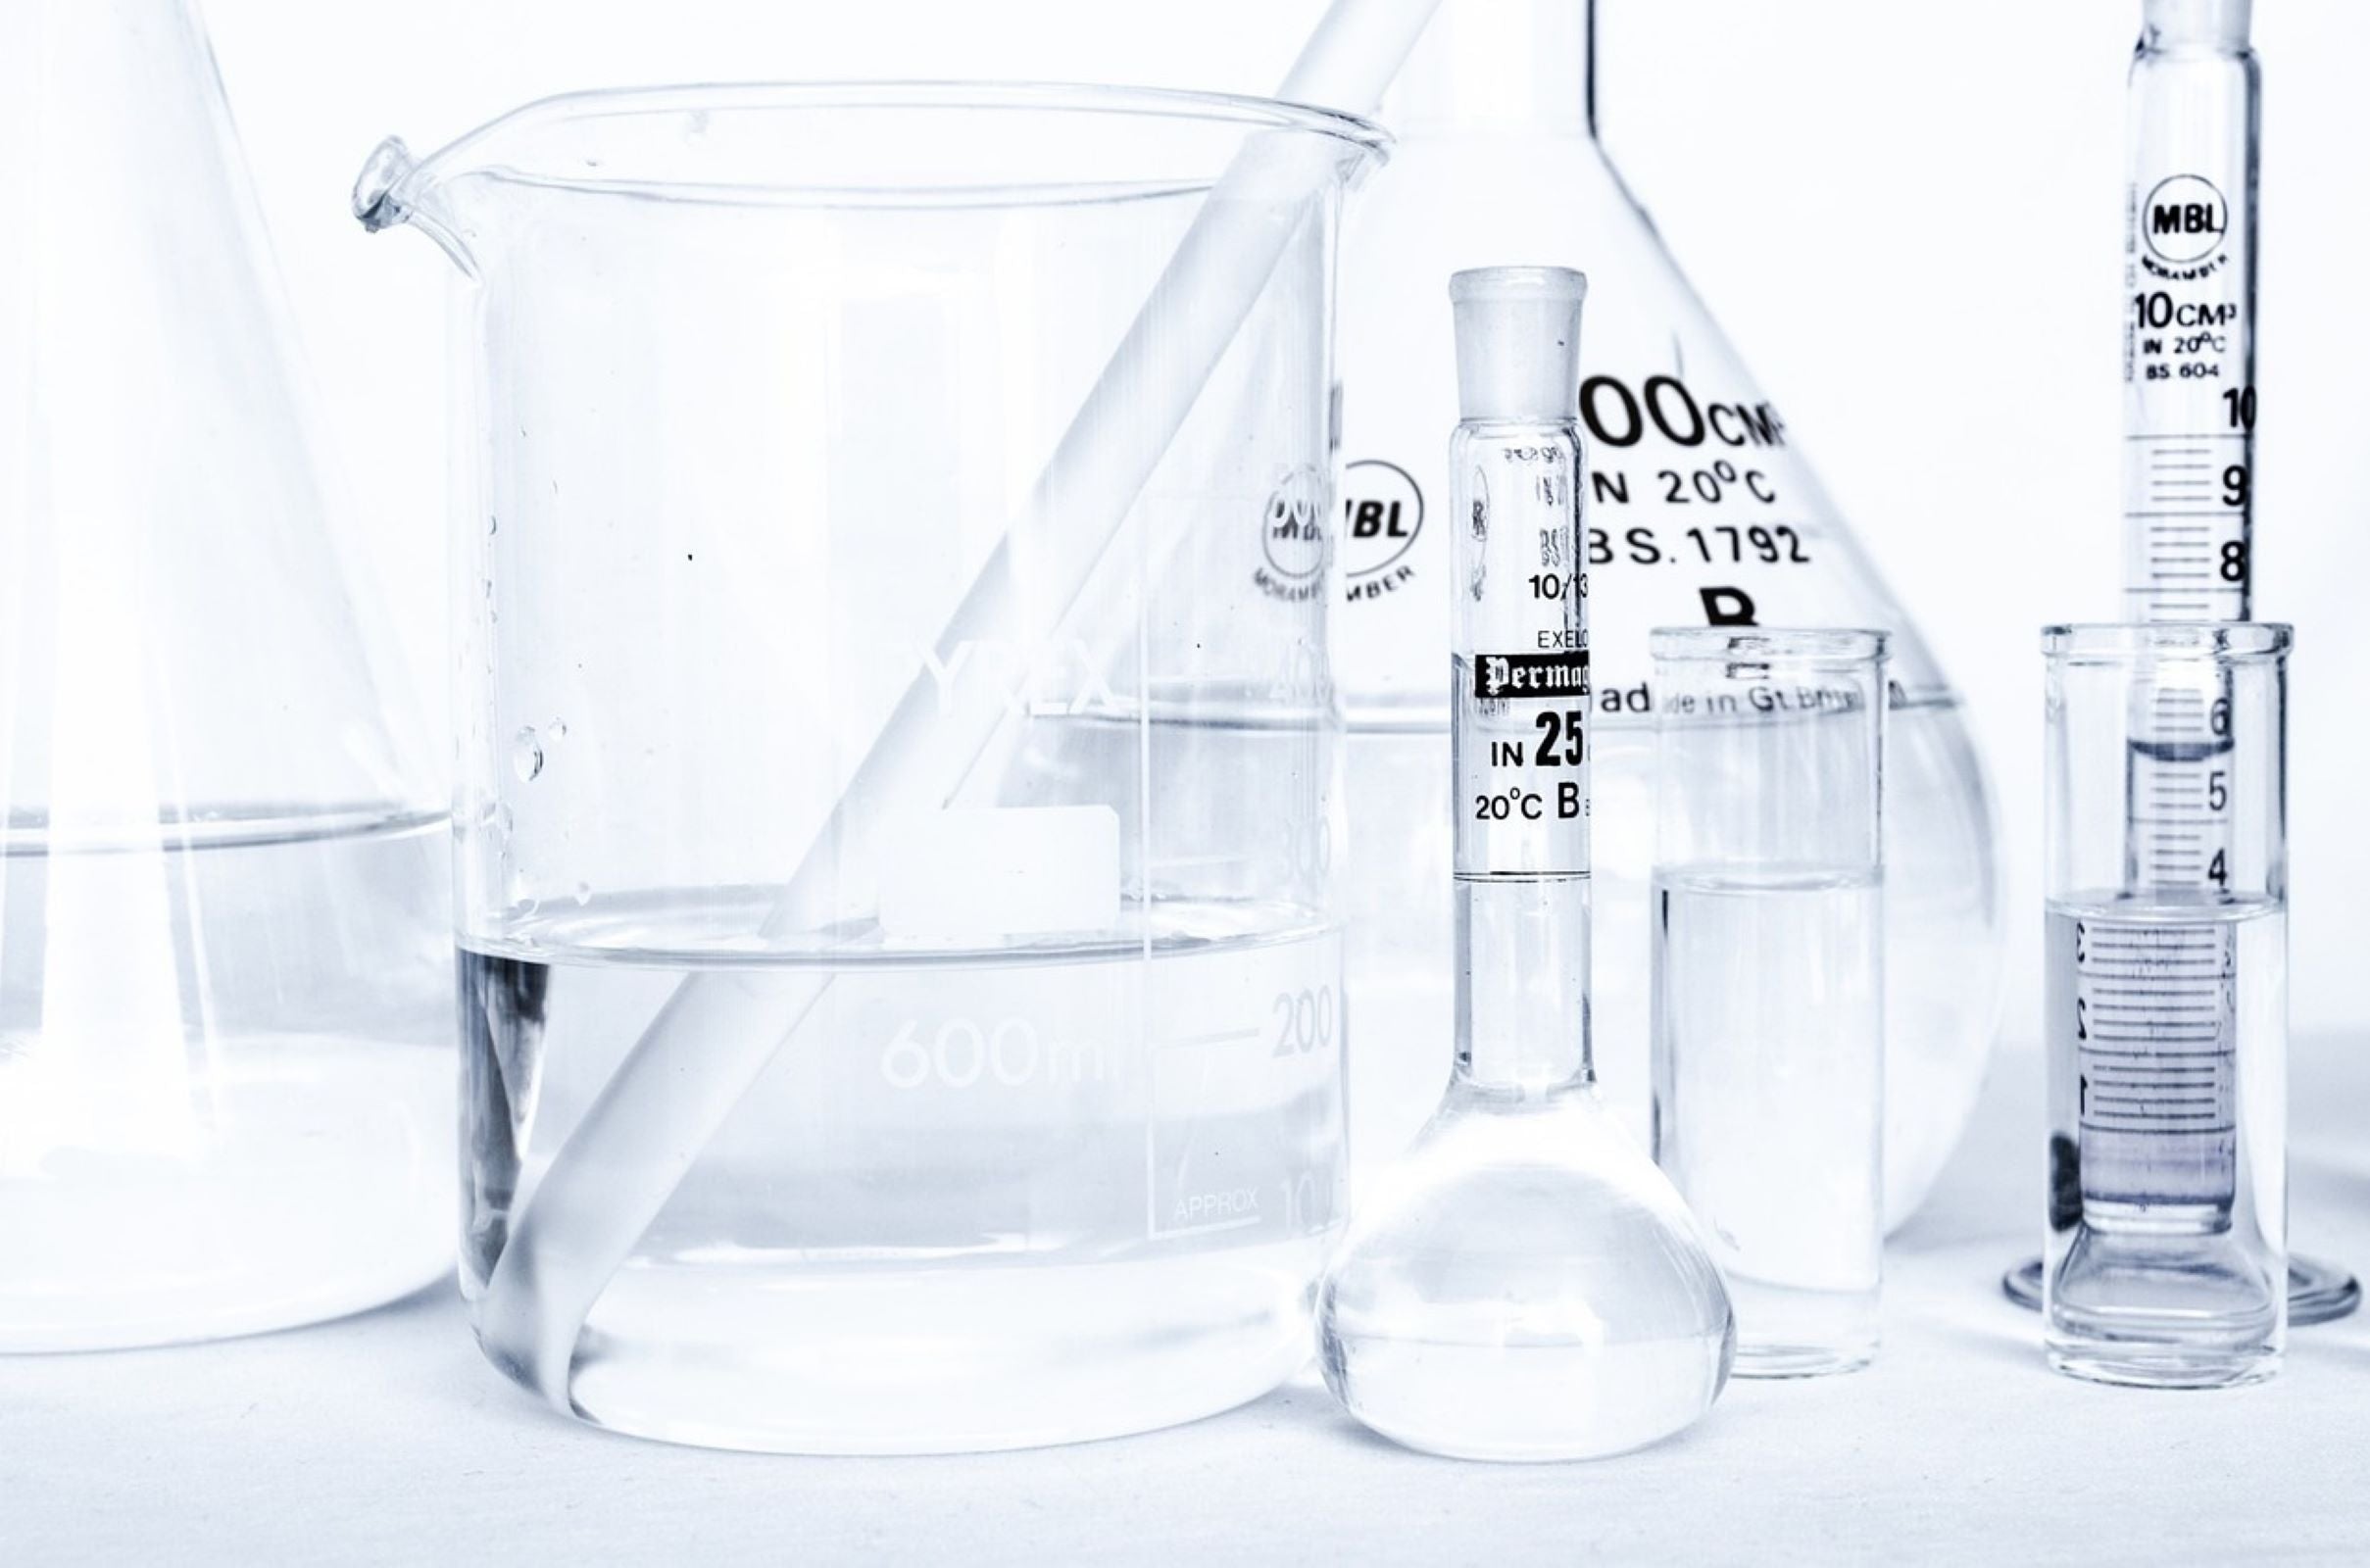 Laboratory glassware flasks containing water used for USP or EP test methods for supplements and pharmaceuticals 